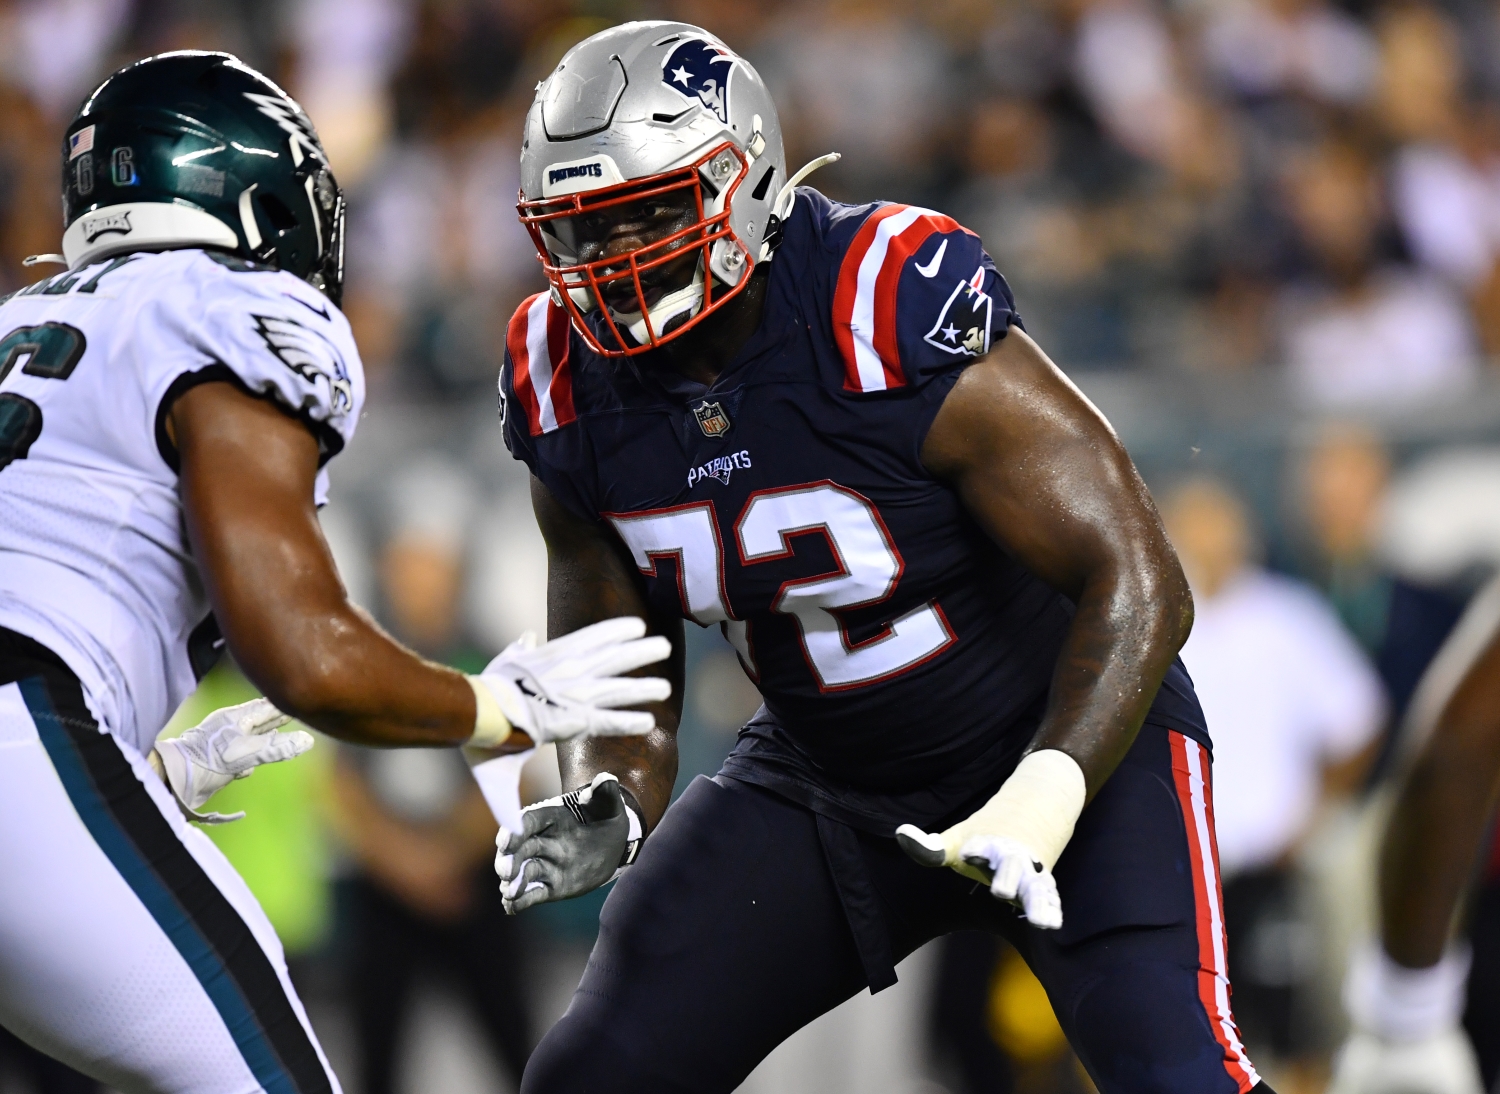 New England Patriots offensive tackle Yodny Cajuste gets ready to block a Philadelphia Eagles defender.